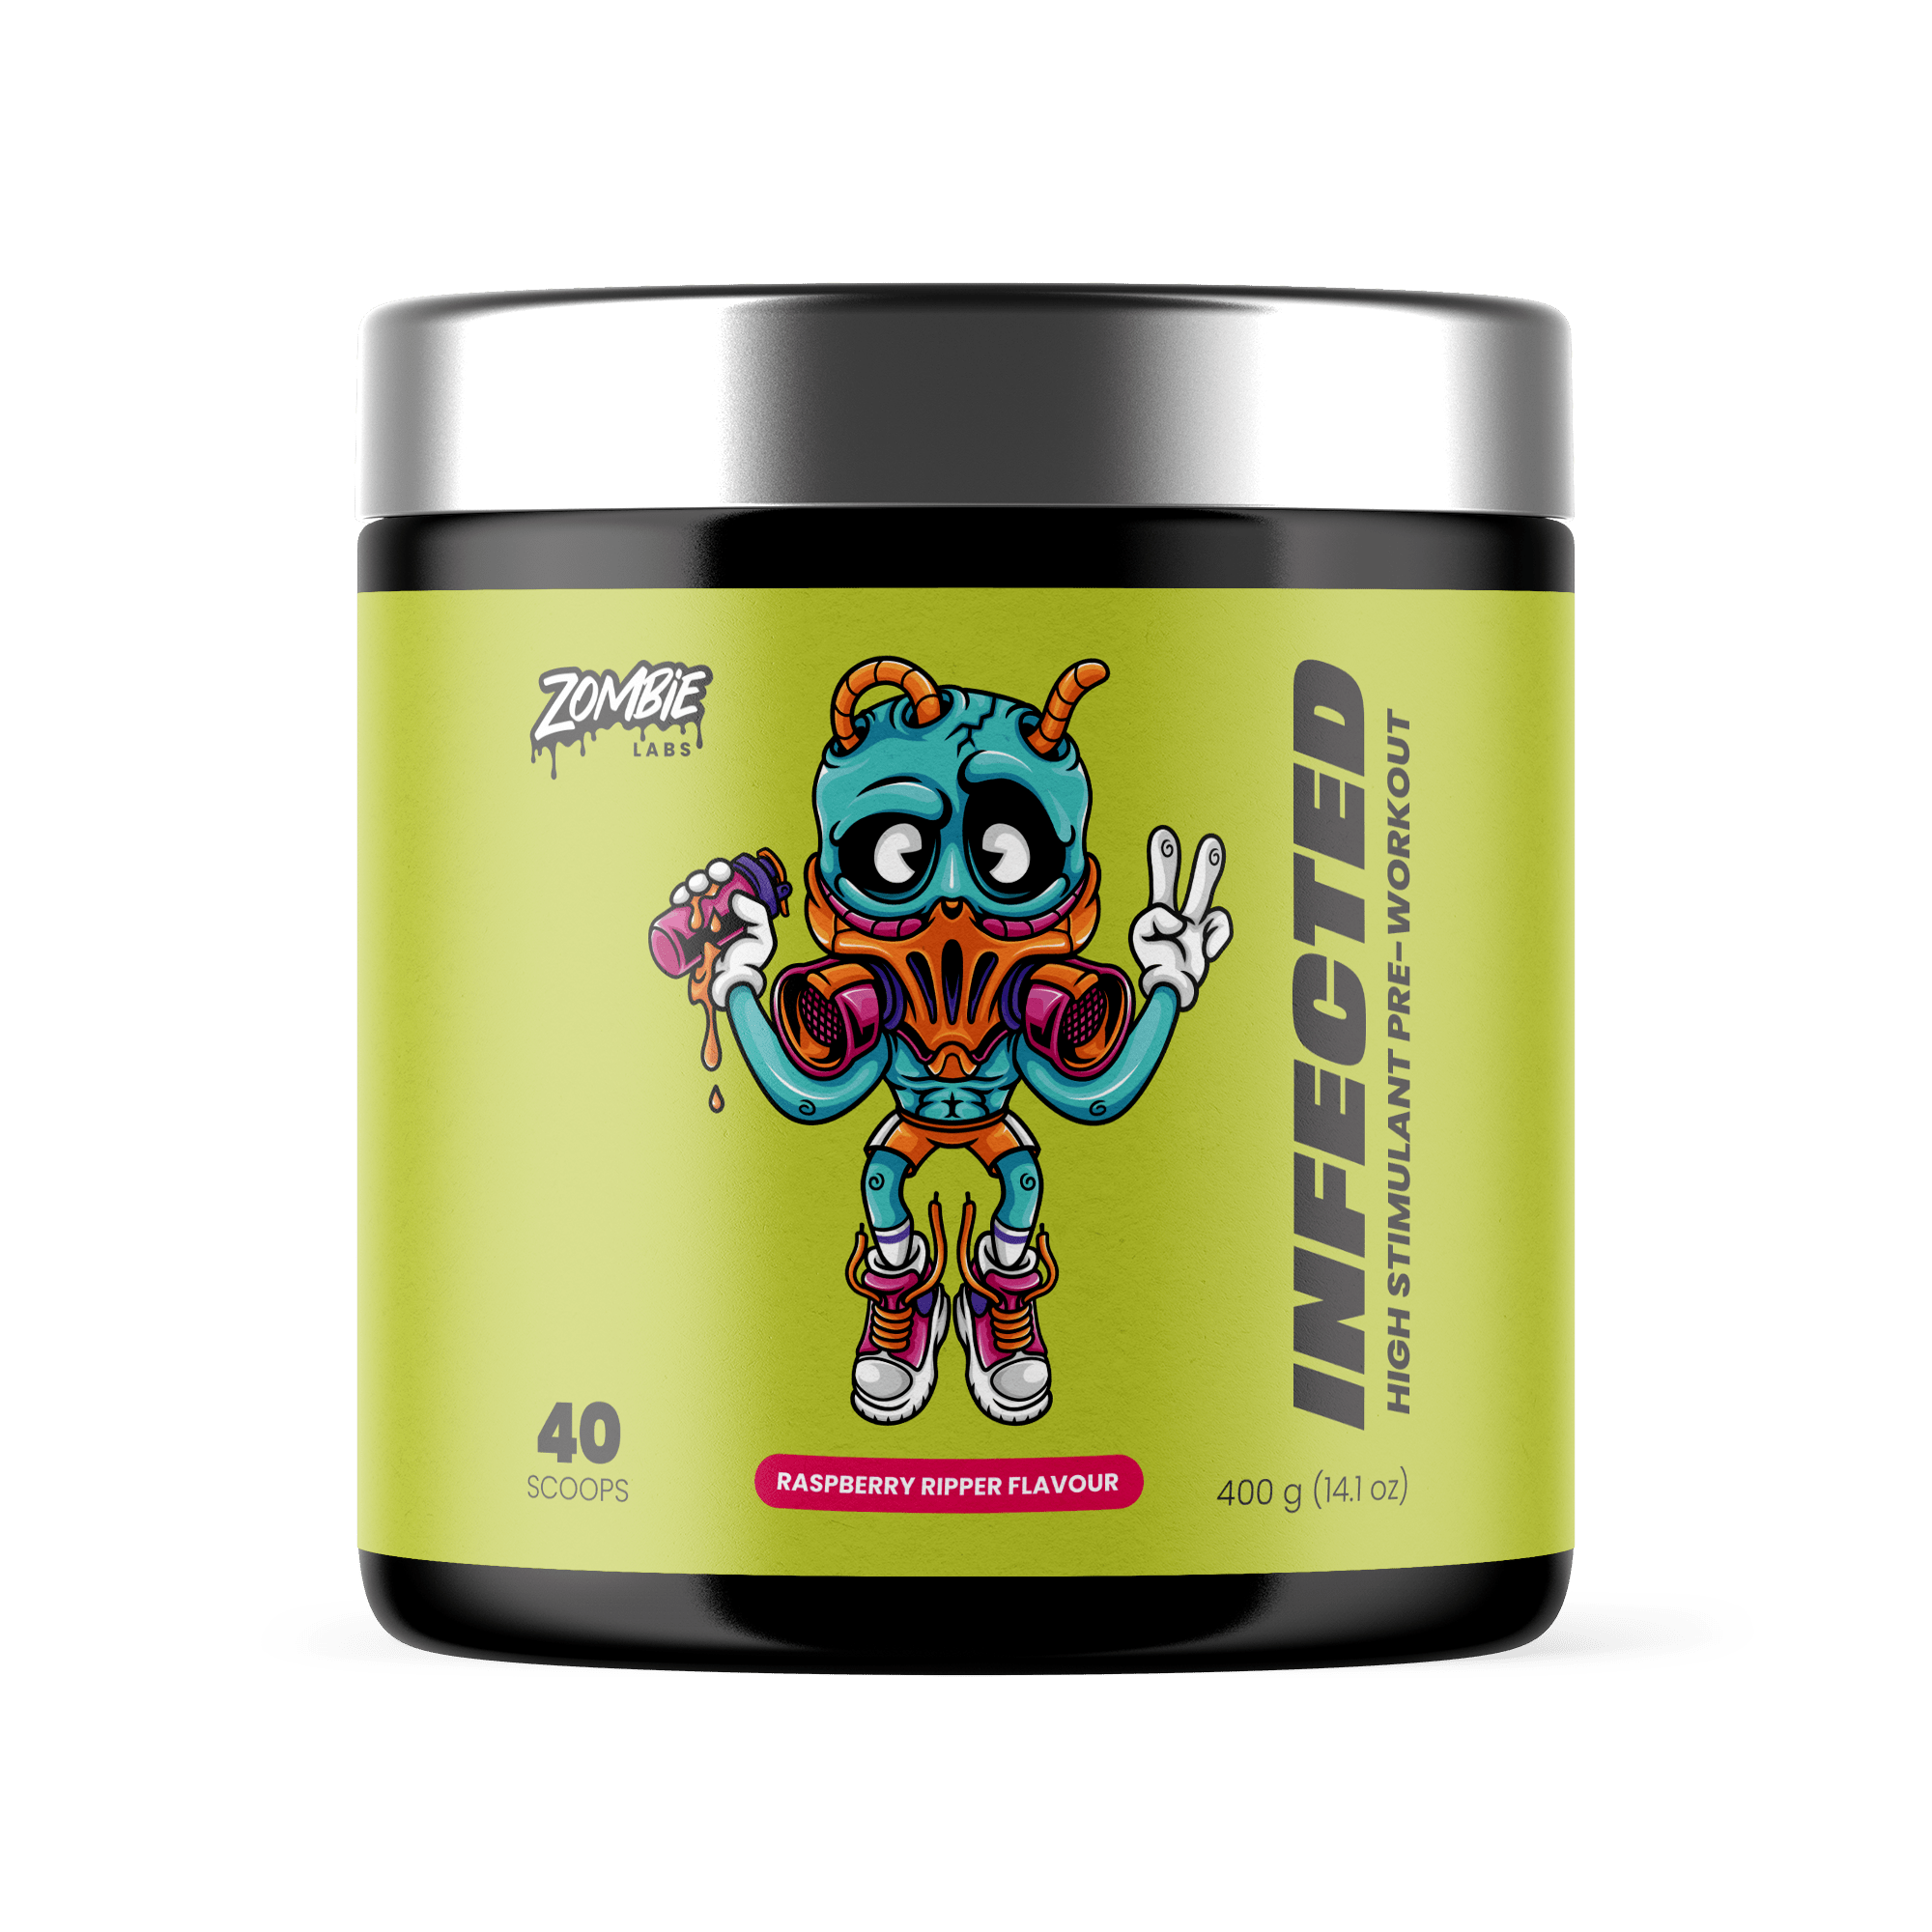 Infected High Stim Pre-Workout by Zombie Labs